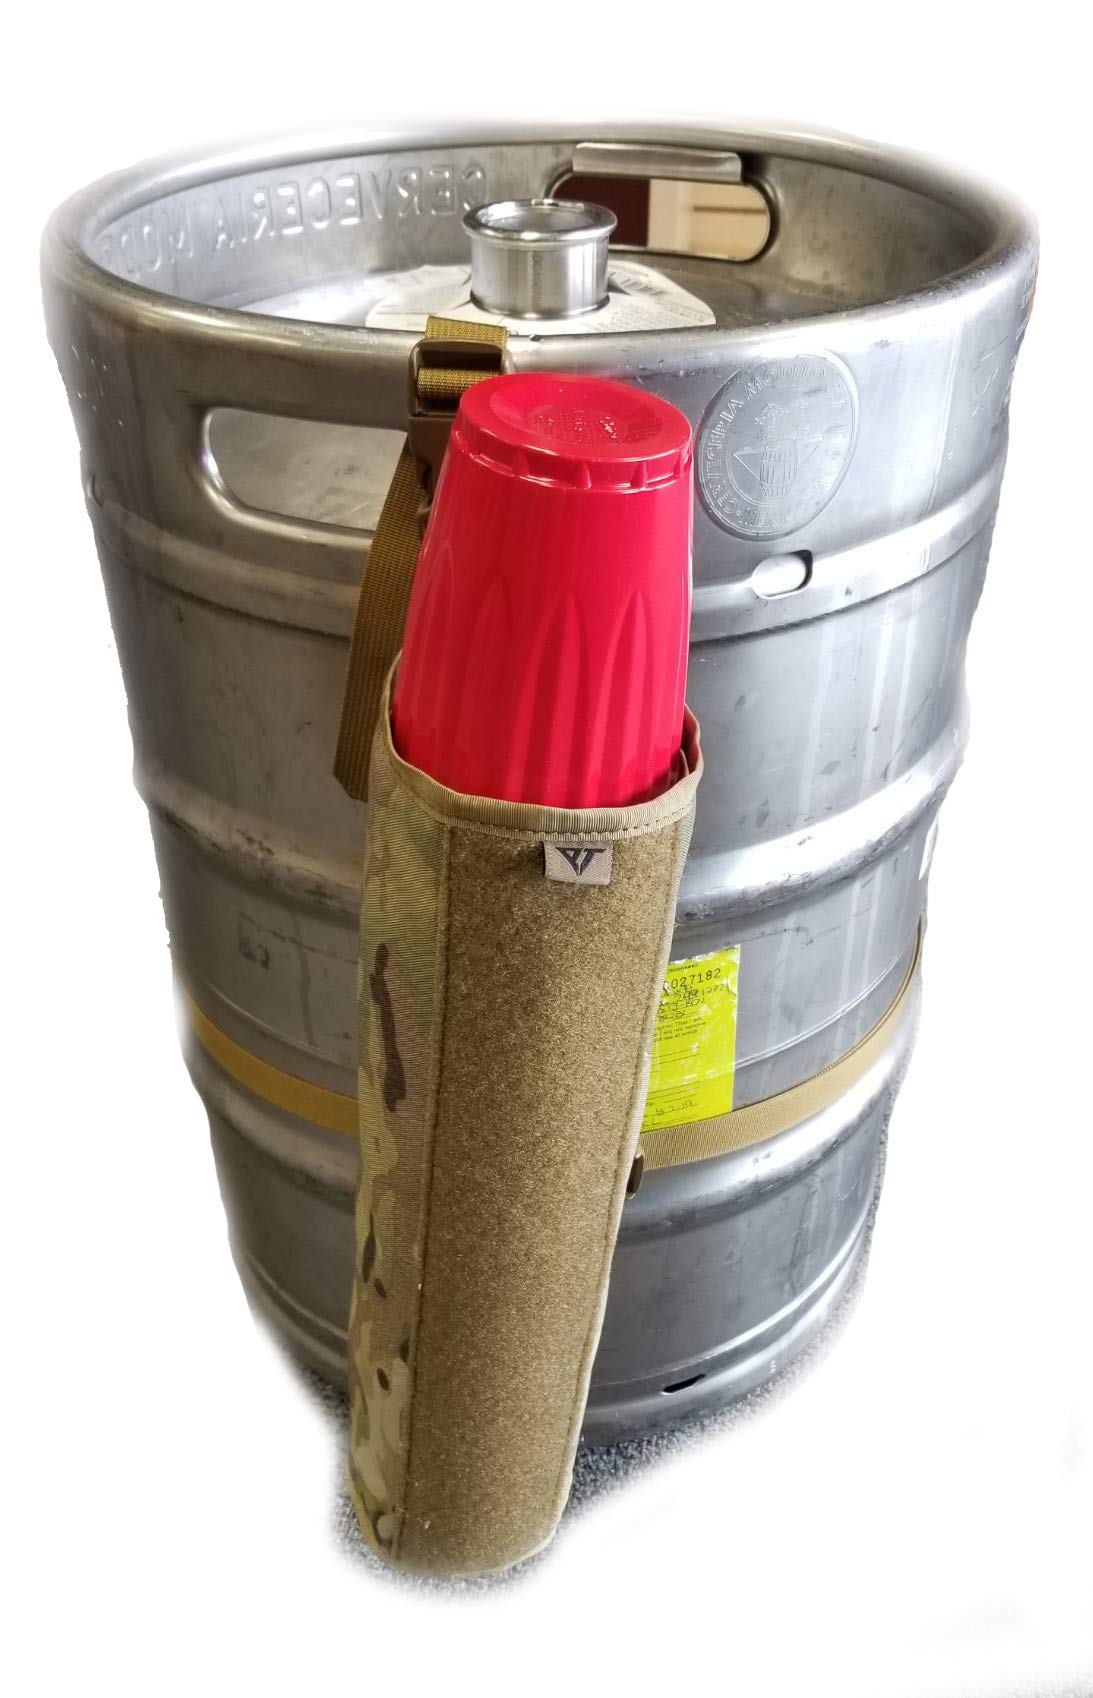 THE"TACTICAL" RED CUP CADDY FOR KEGS (AMERICAN MADE) with morale patch panel